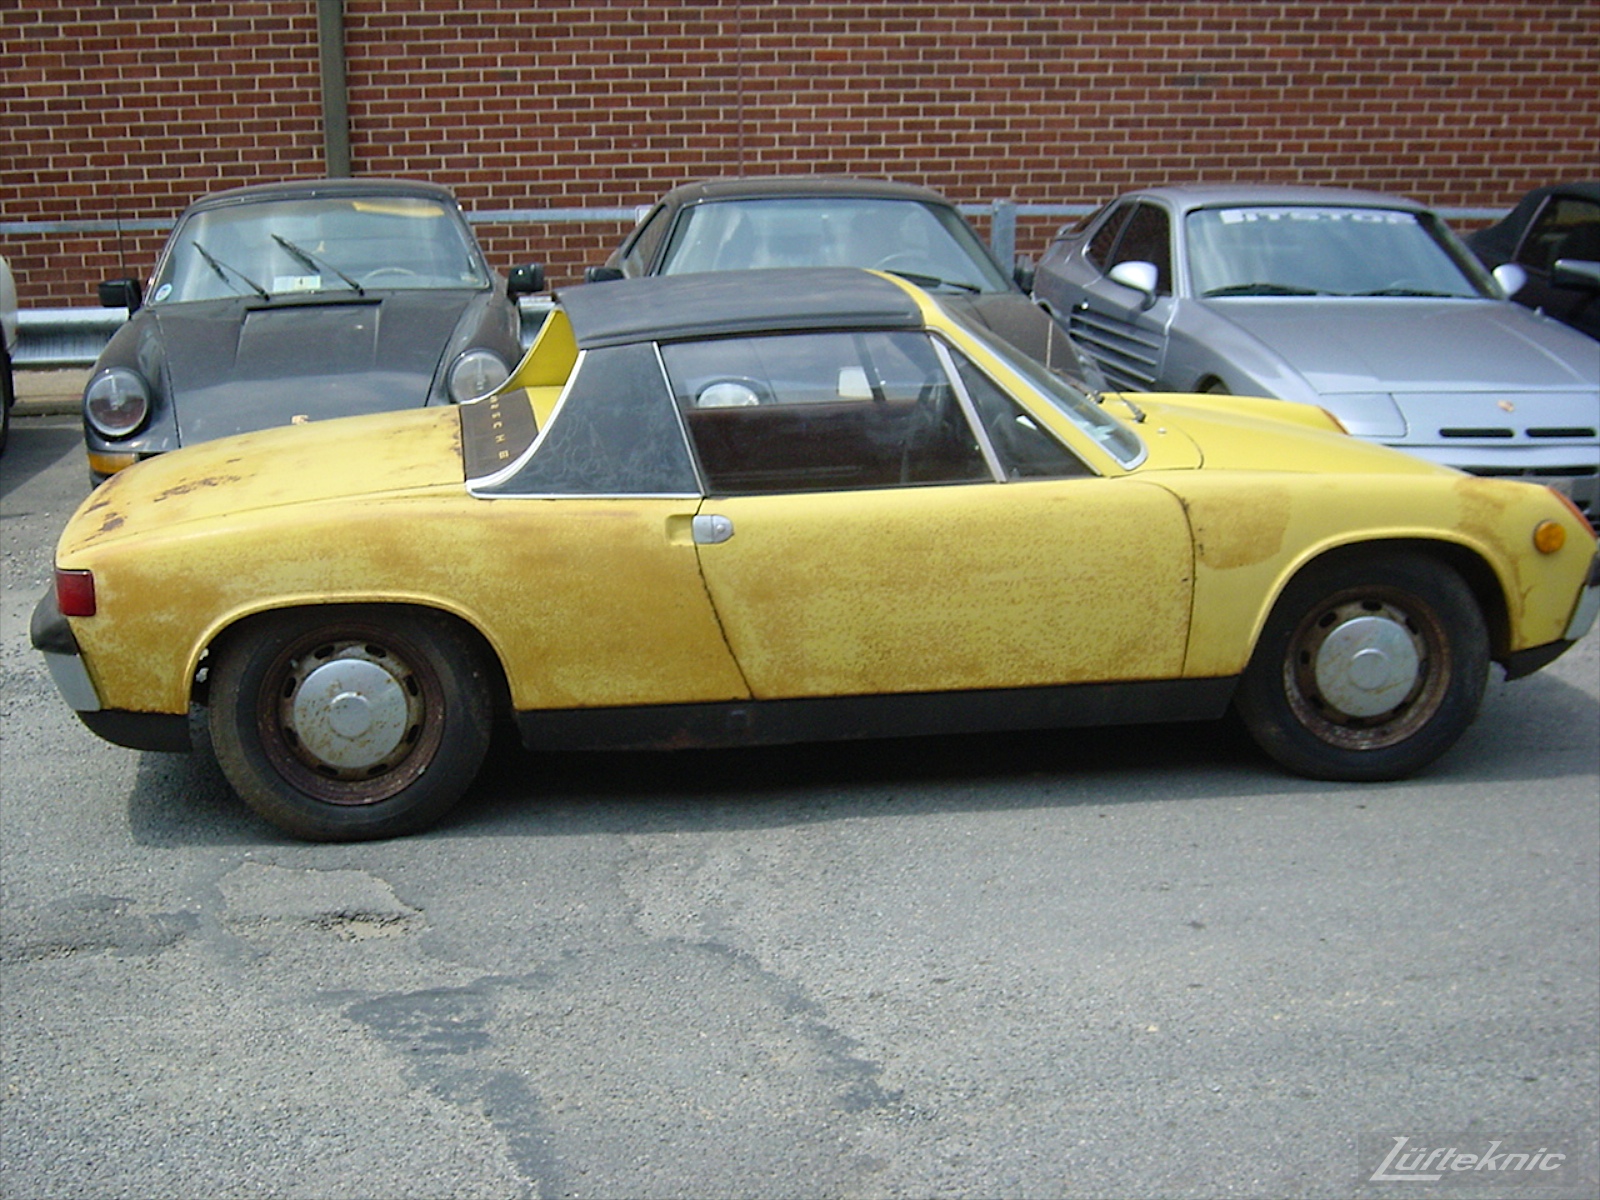 An old rusty 914 sitting in a parking lot with other Porsches before restoration.